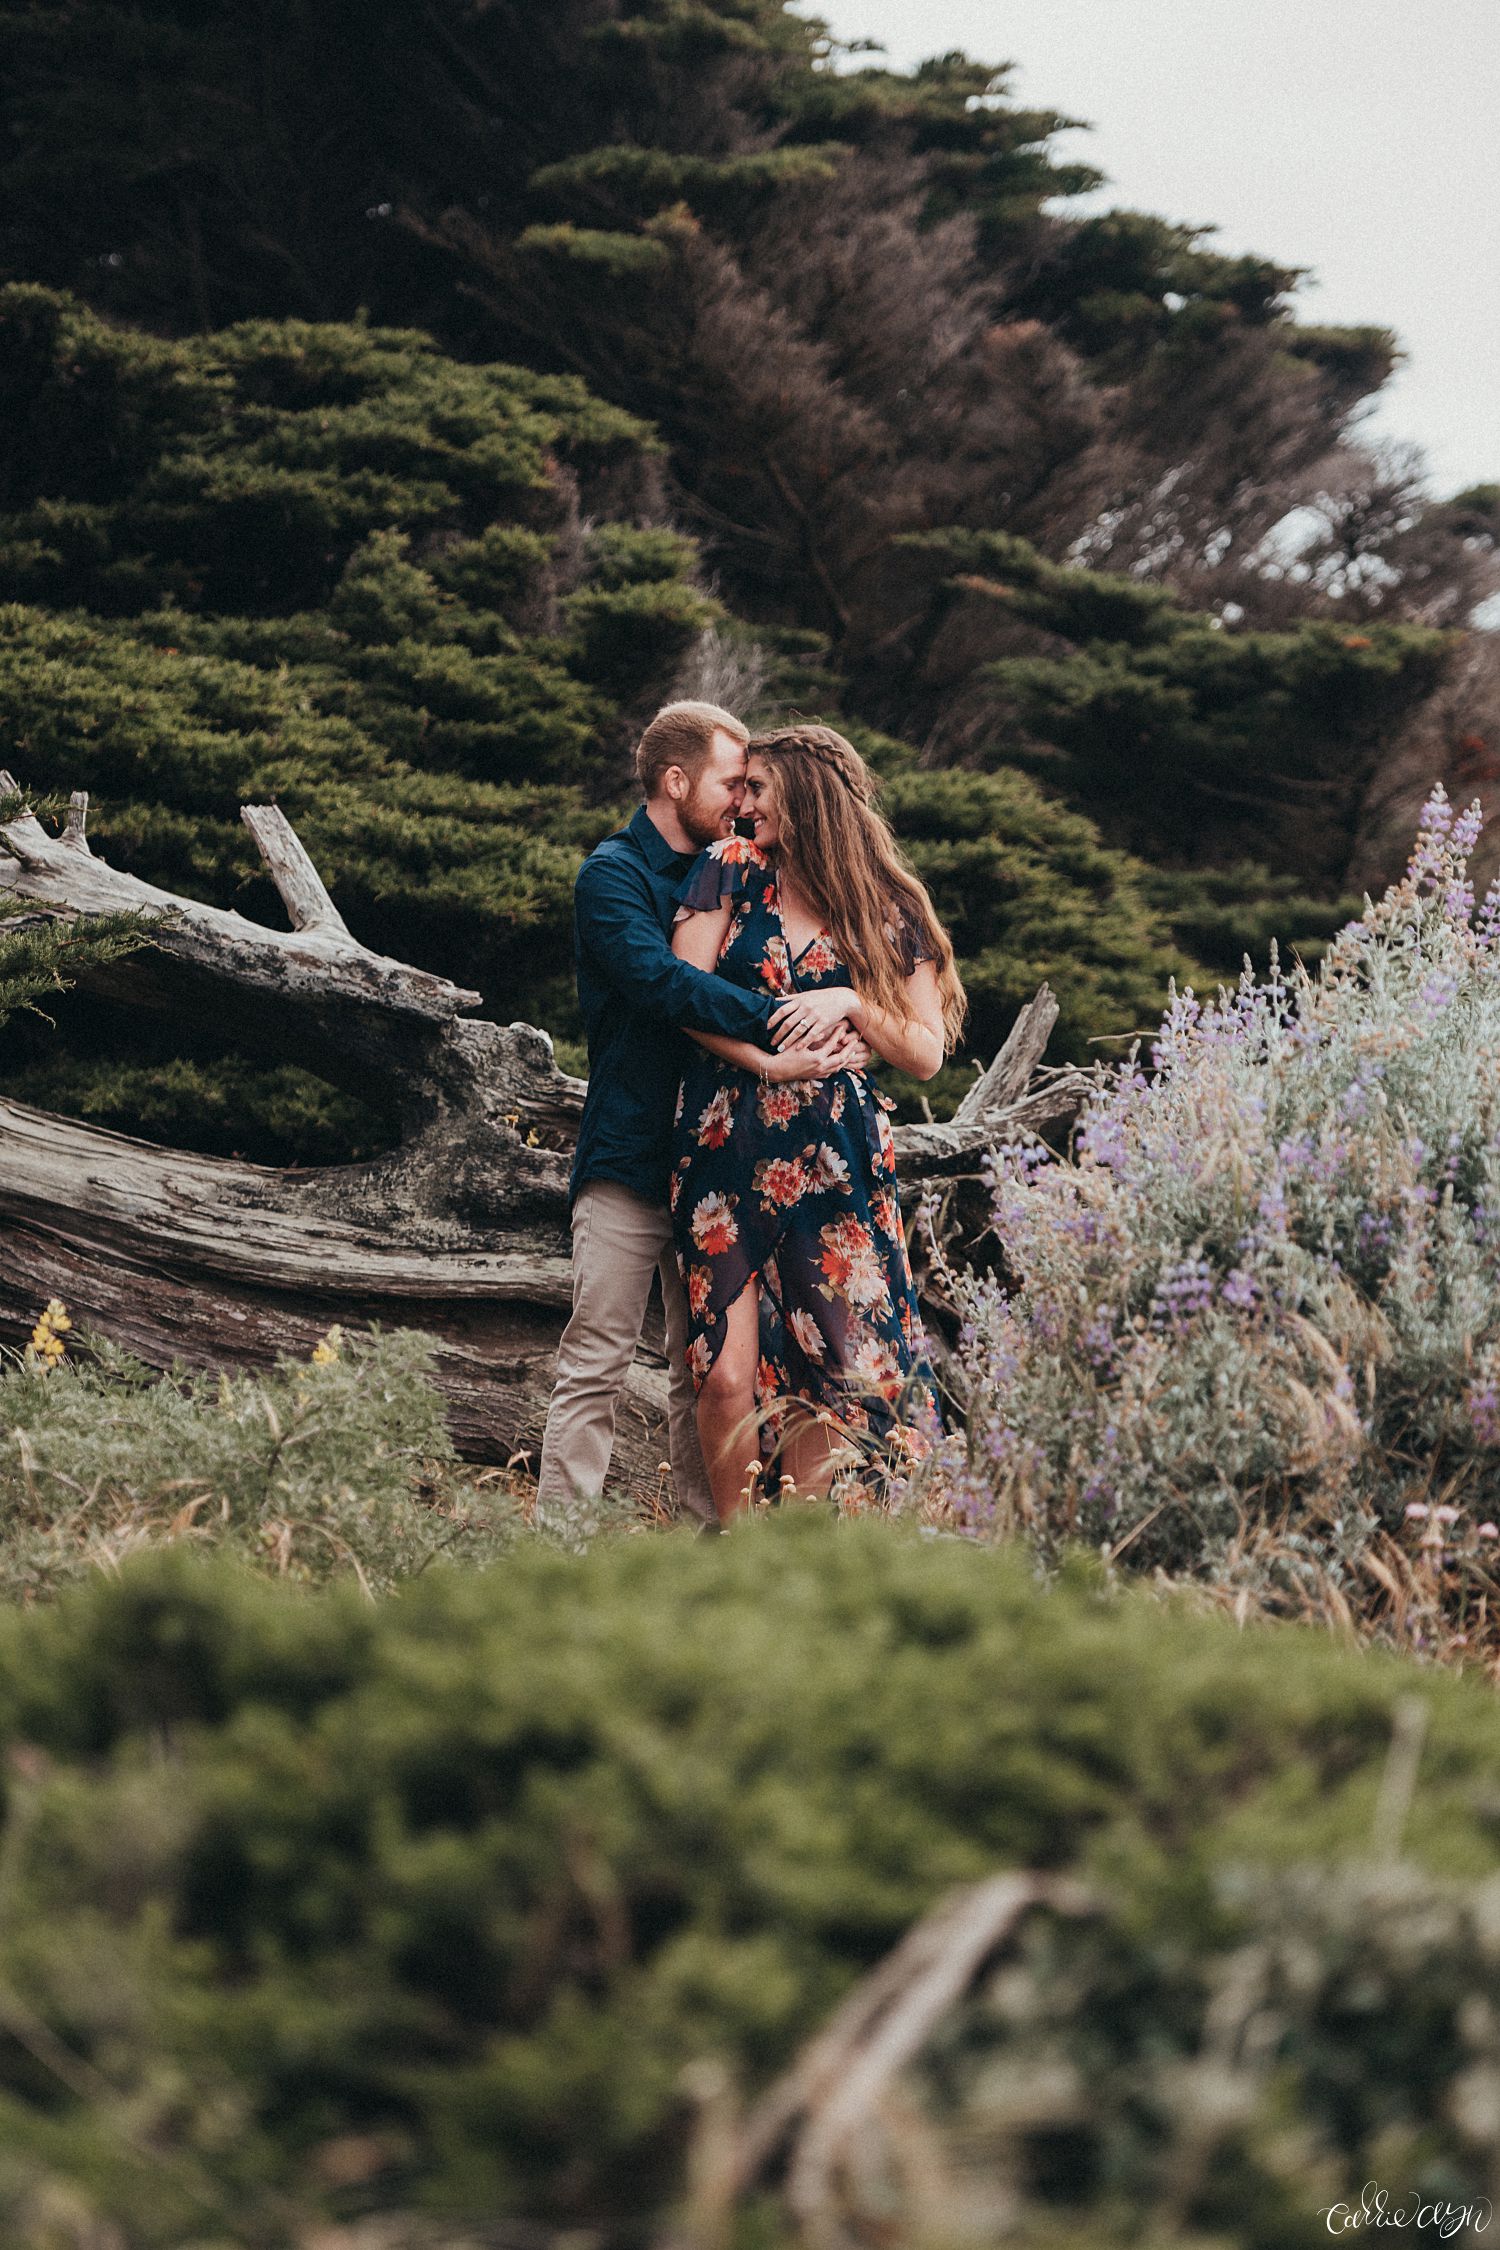 A Sutro Baths Engagement Session in San Francisco